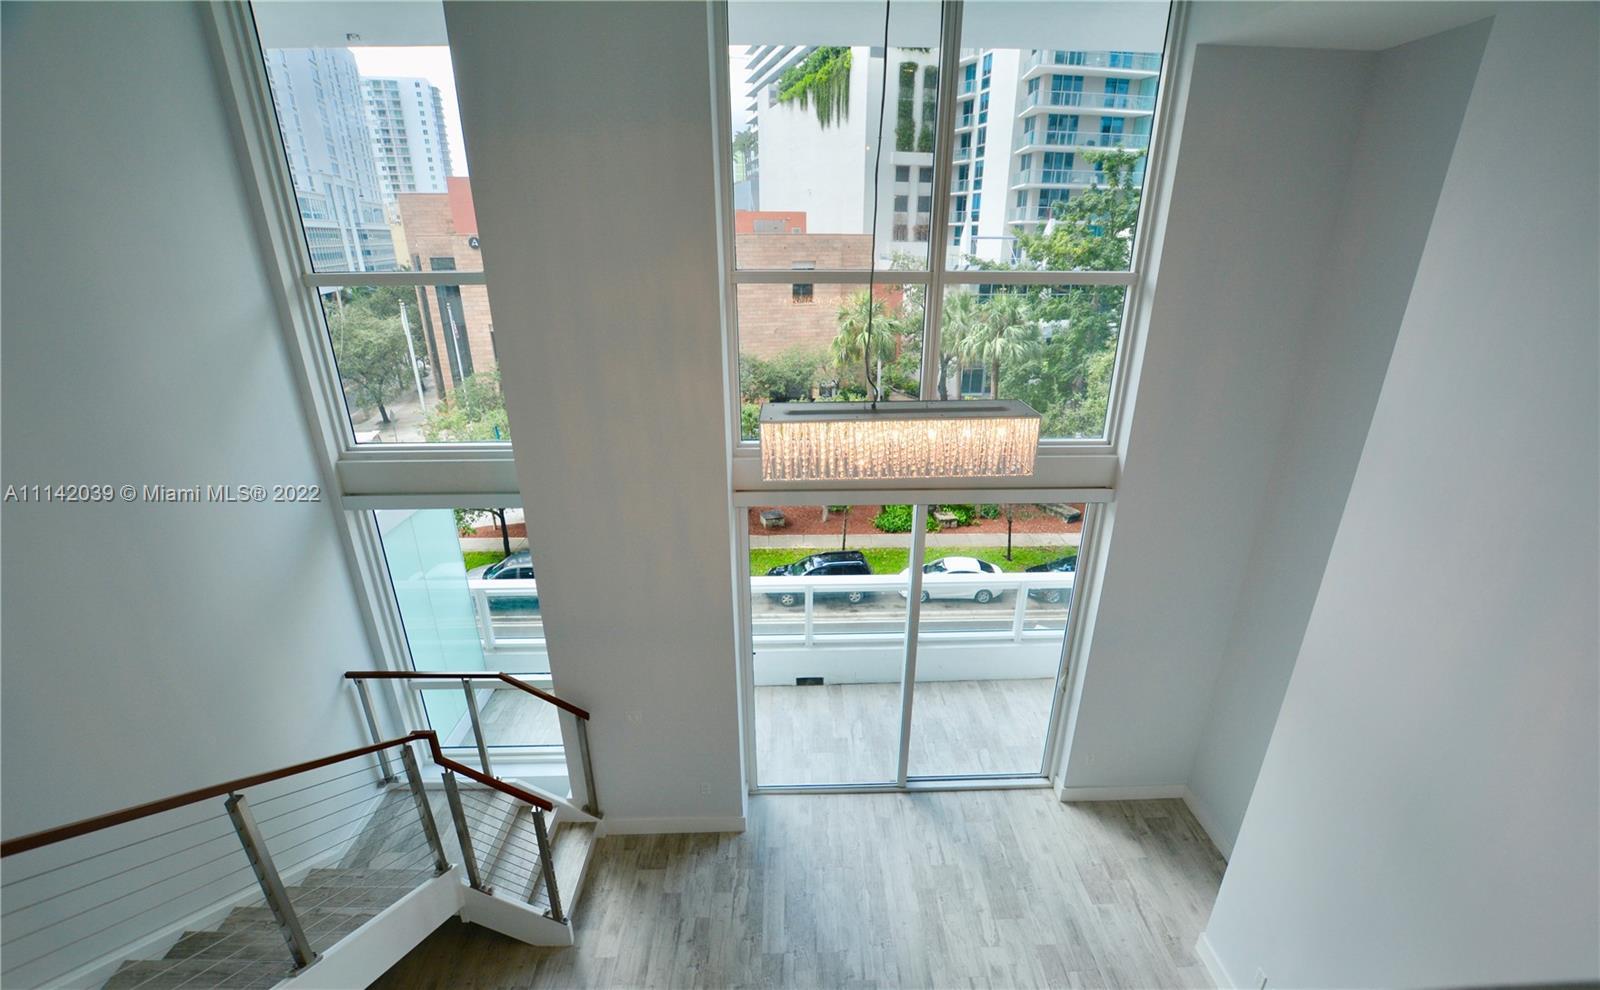 Spectacular Loft Style 1 bed 1.5 bath 2 Story spacious residence in 1080 Bond in the heart of Bricke